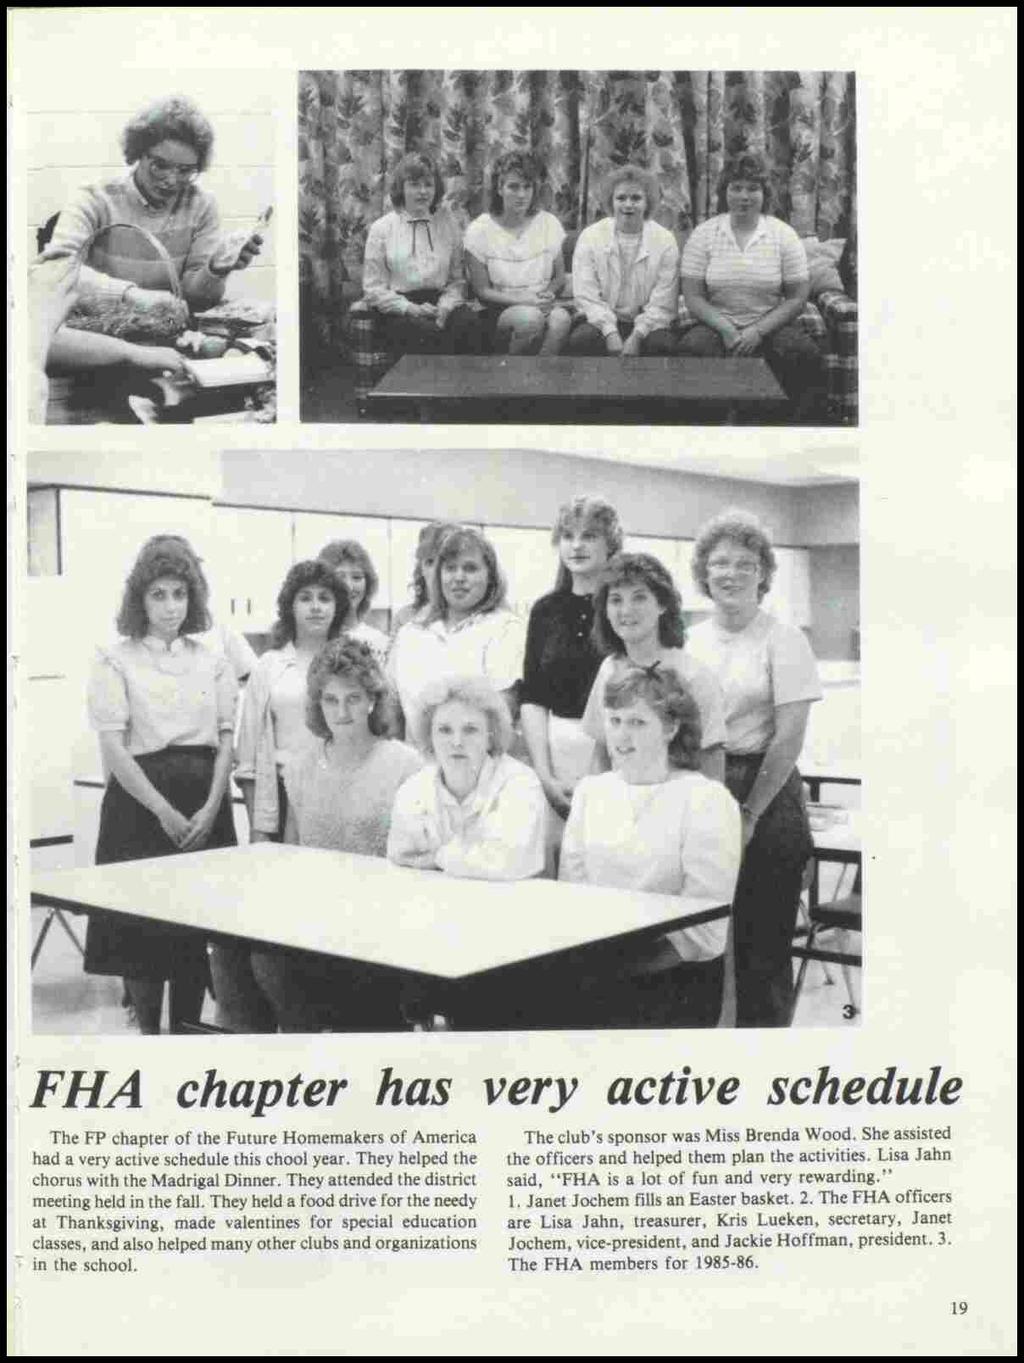 FHA chapter has The FP chapter of the Future Homemakers of America had a very active schedule this chool year. They helped the chorus with the Madrigal Dinner.